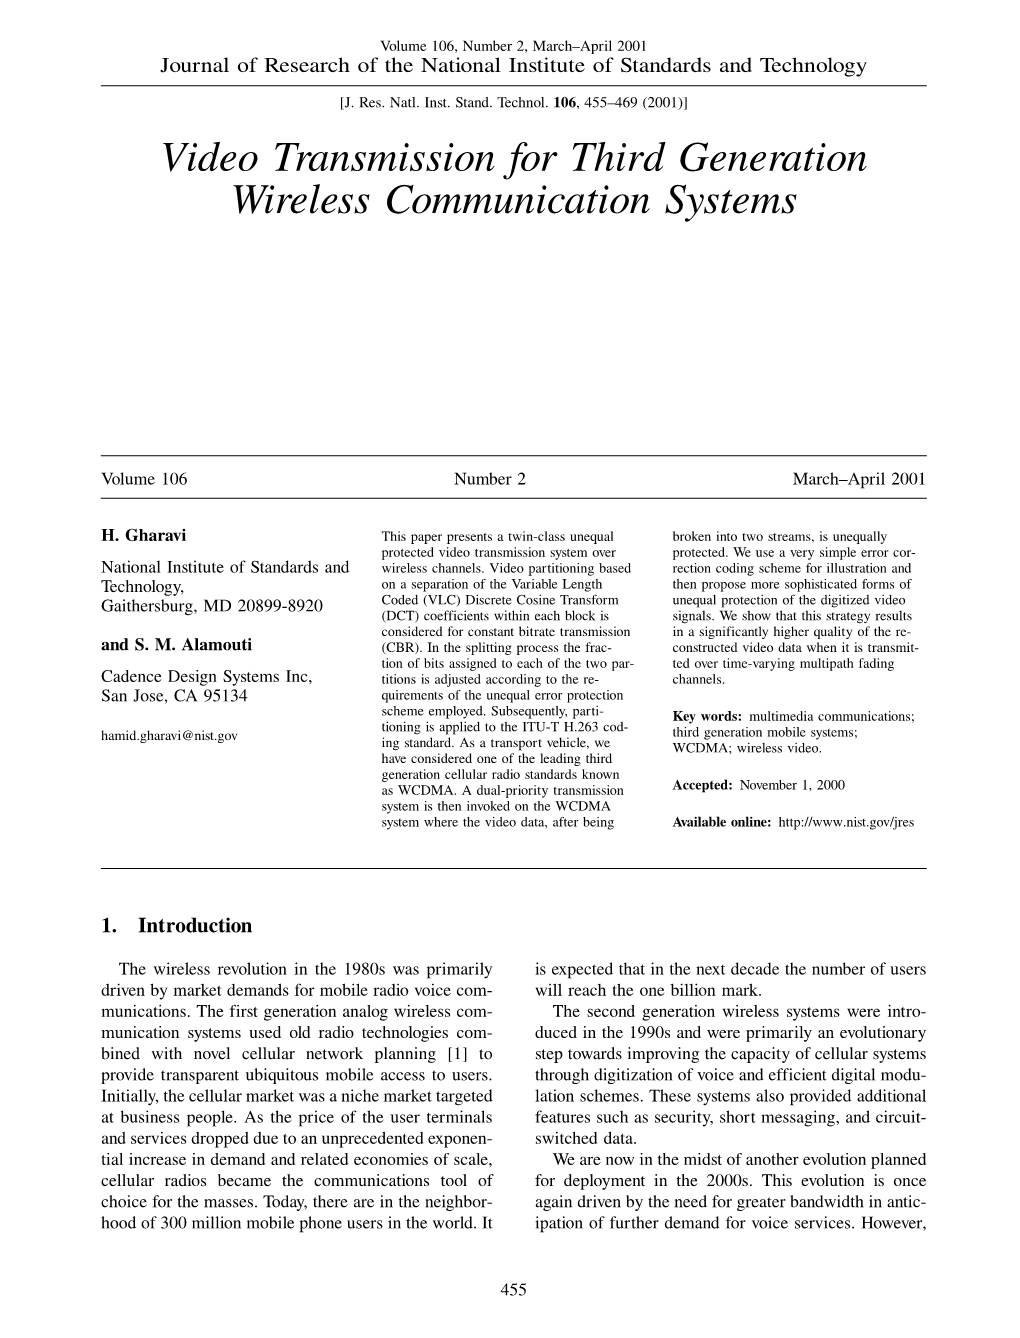 Video Transmission for Third Generation Wireless Communication Systems